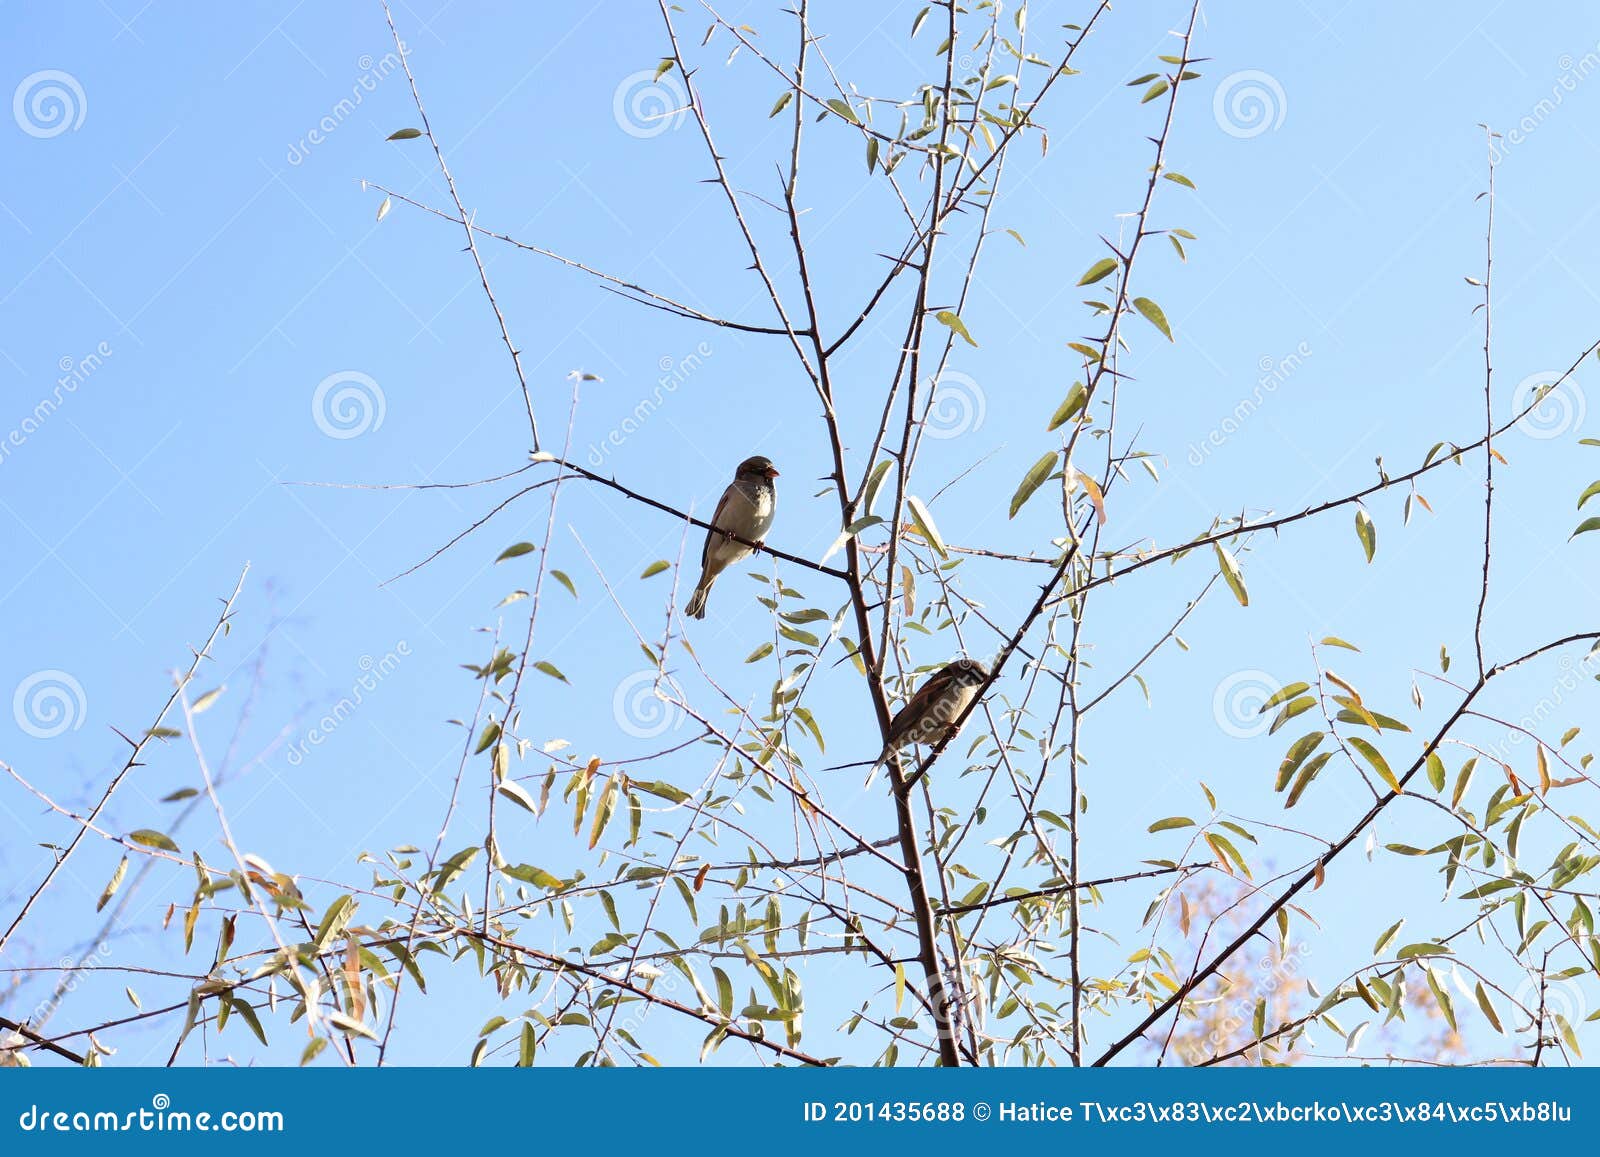 two sparrow birds on branches dressed in autumn colors